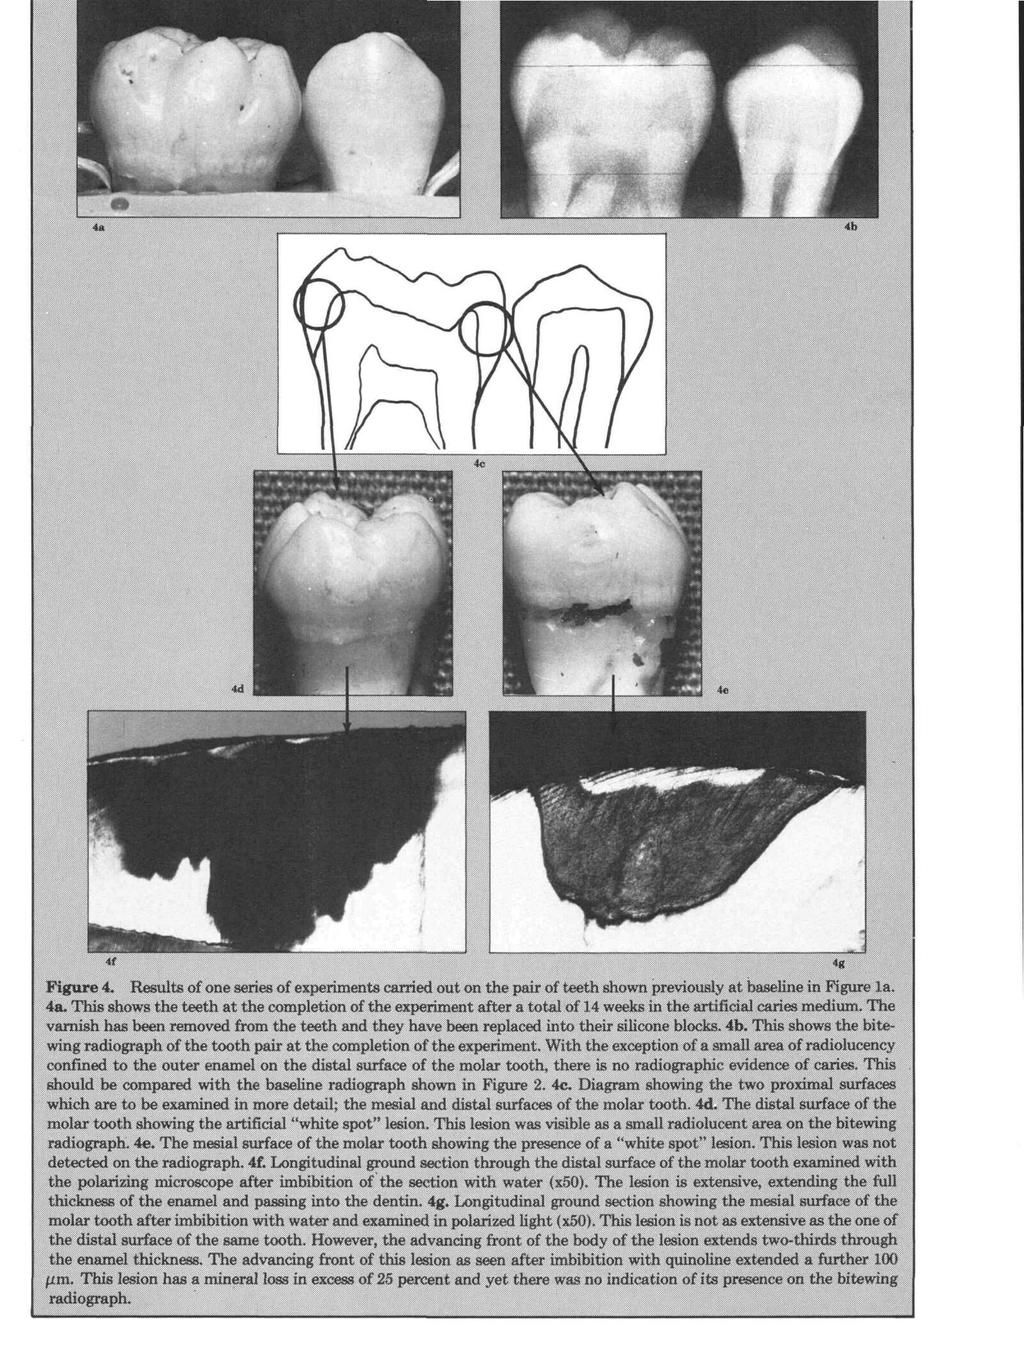 Figure 4. Results of one series of experiments carried out on the pair of teeth shown previously at baseline in Figure la. 4a.